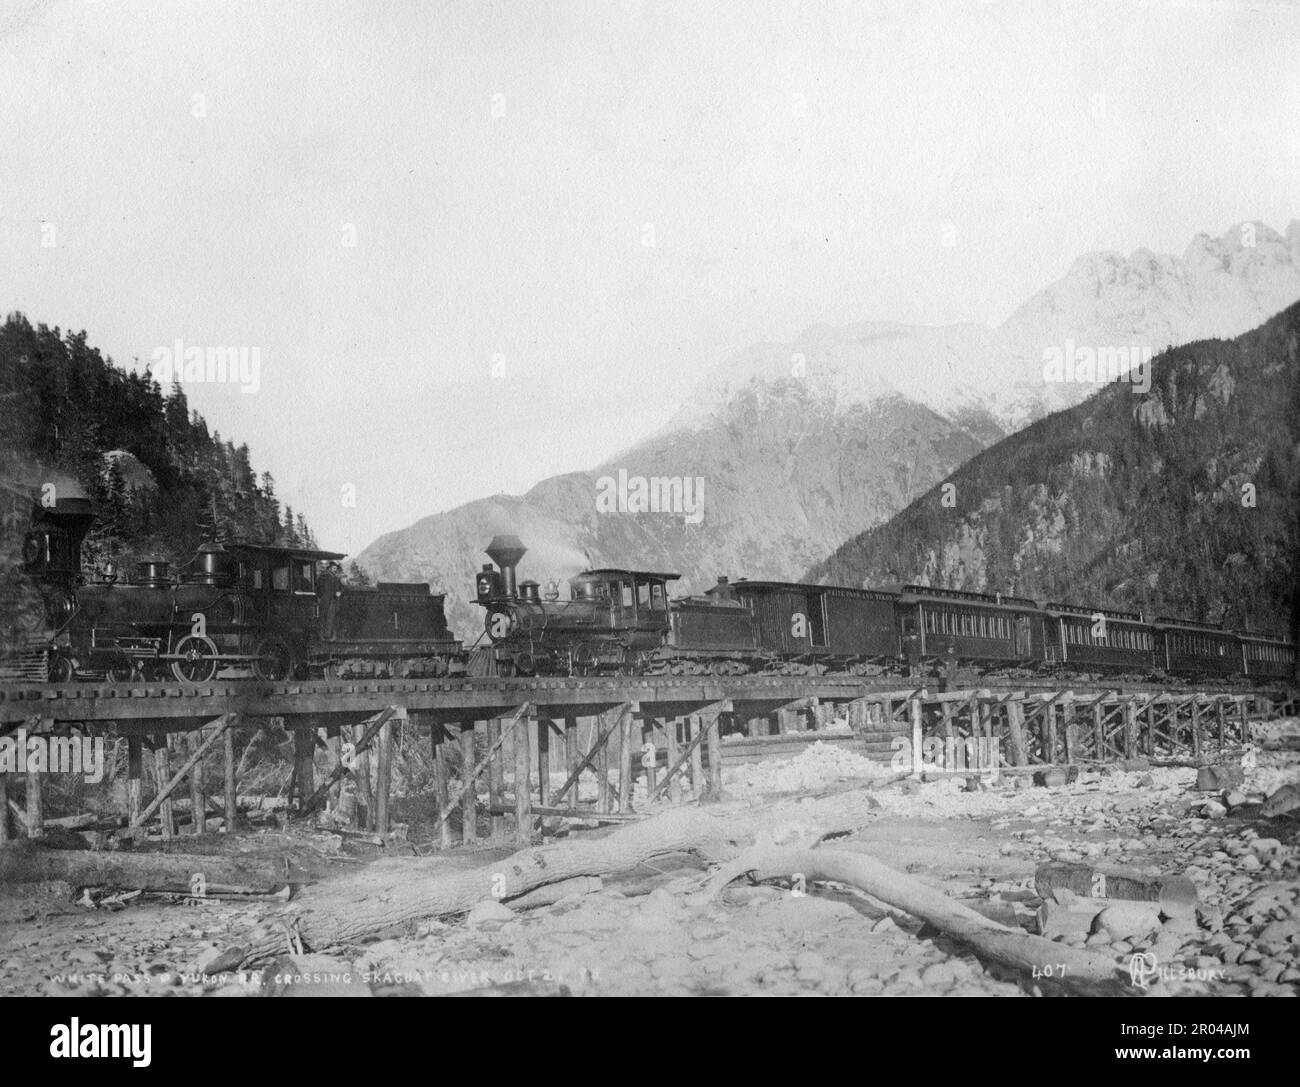 White Pass and Yukon Railway train crossing Skagway River, October 21, 1898. During the Klondike Gold Rush, the White Pass was one of the routes used by prospectors to travel from Skagway to the Yukon gold fields. In April 1898 the White Pass and Yukon Railroad Company was formed in an effort to establish an easier way through the pass. Construction on the railroad began the following month. Thousands of workers worked around the clock in treacherous conditions to complete the project. The railroad track was completed at White Pass on February 20, 1899 and reached Lake Bennett on July 6, 1899. Stock Photo